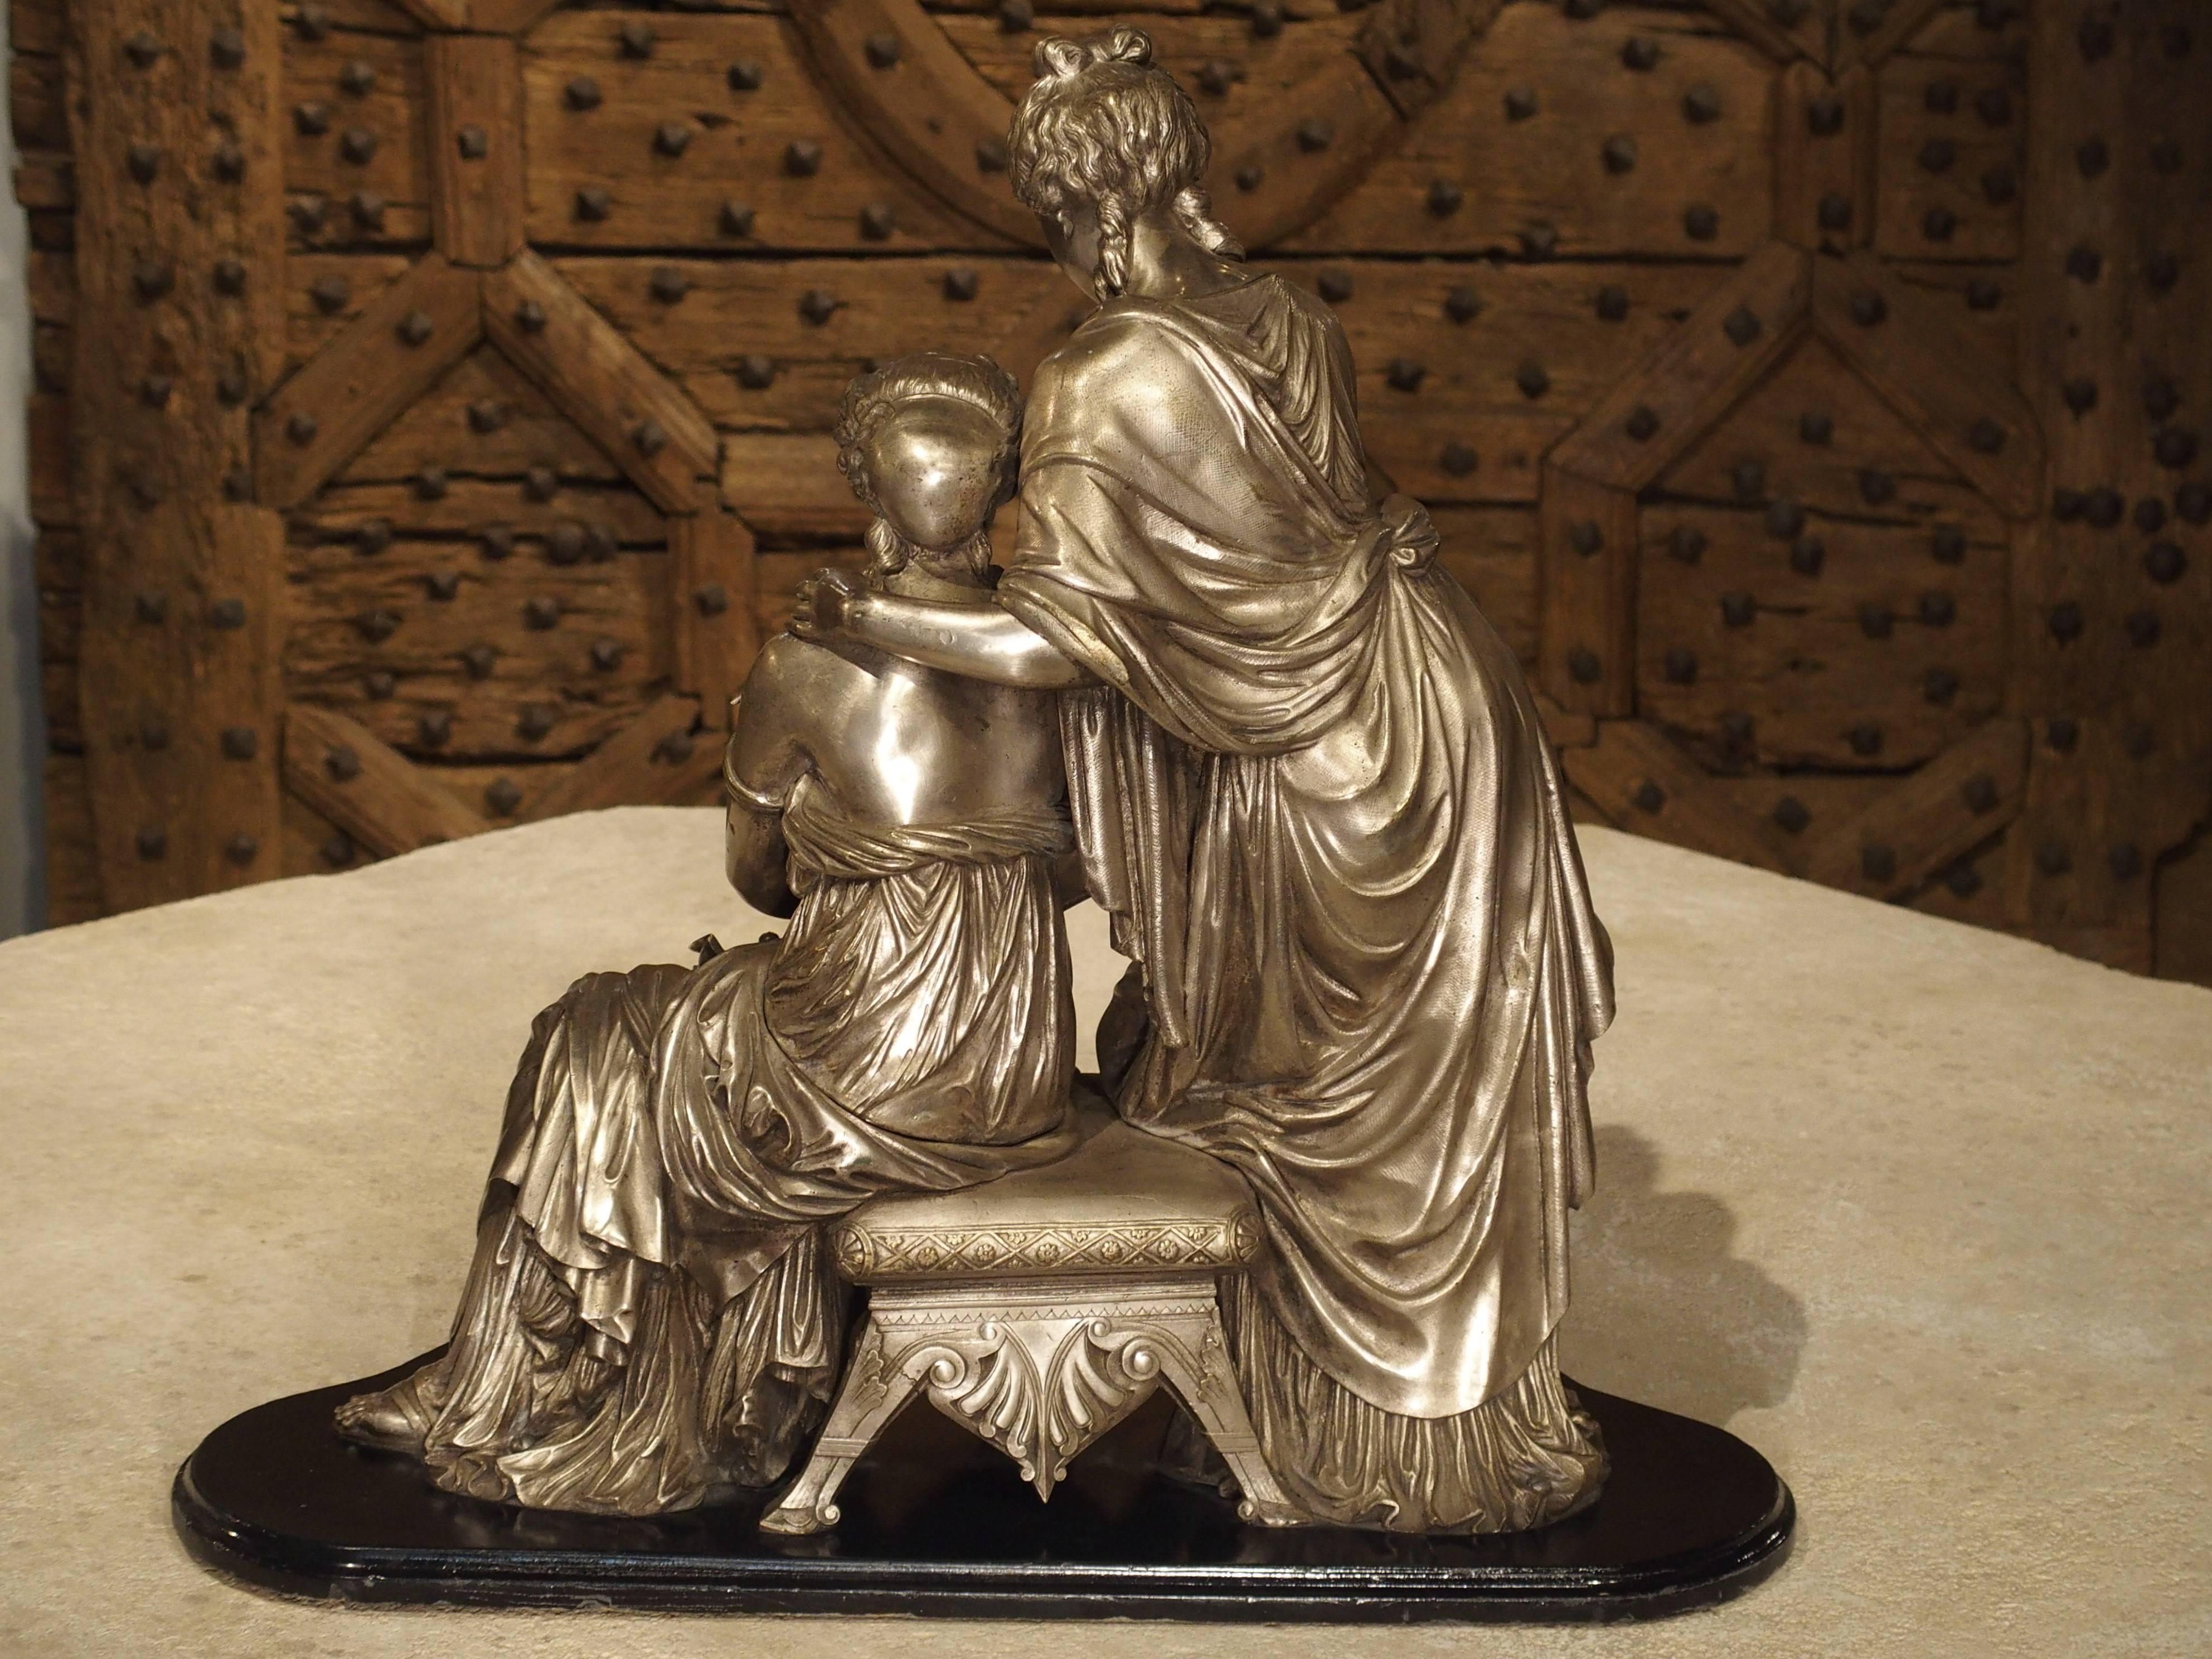 This antique French silvered bronze statuary on painted wooden base depicts two women in classical dress reading a long scroll. The woman who is seated upon a wonderfully detailed small bench, holds a writing instrument. The other woman is to her